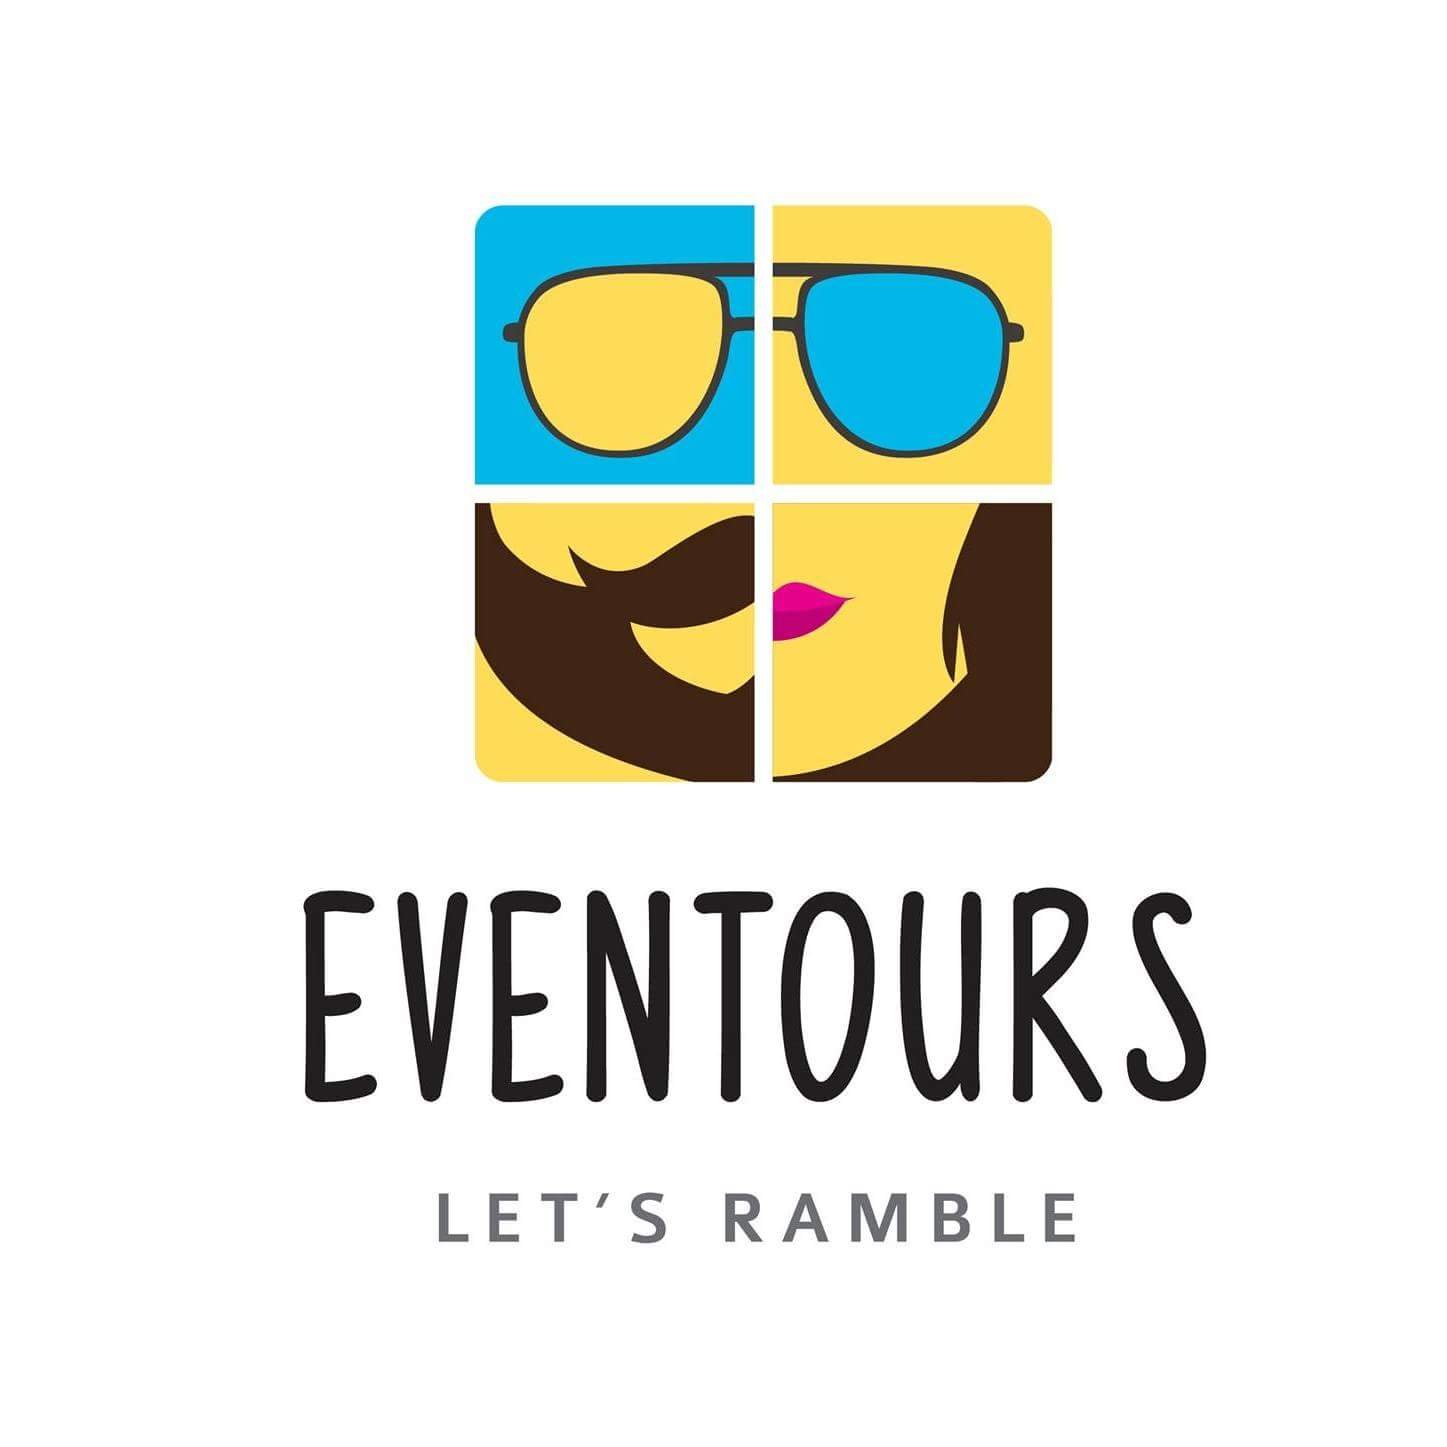 Making events and festivals a part of your travel. https://t.co/HsA1FlVK59
Adventure Travel l Experiences l Events